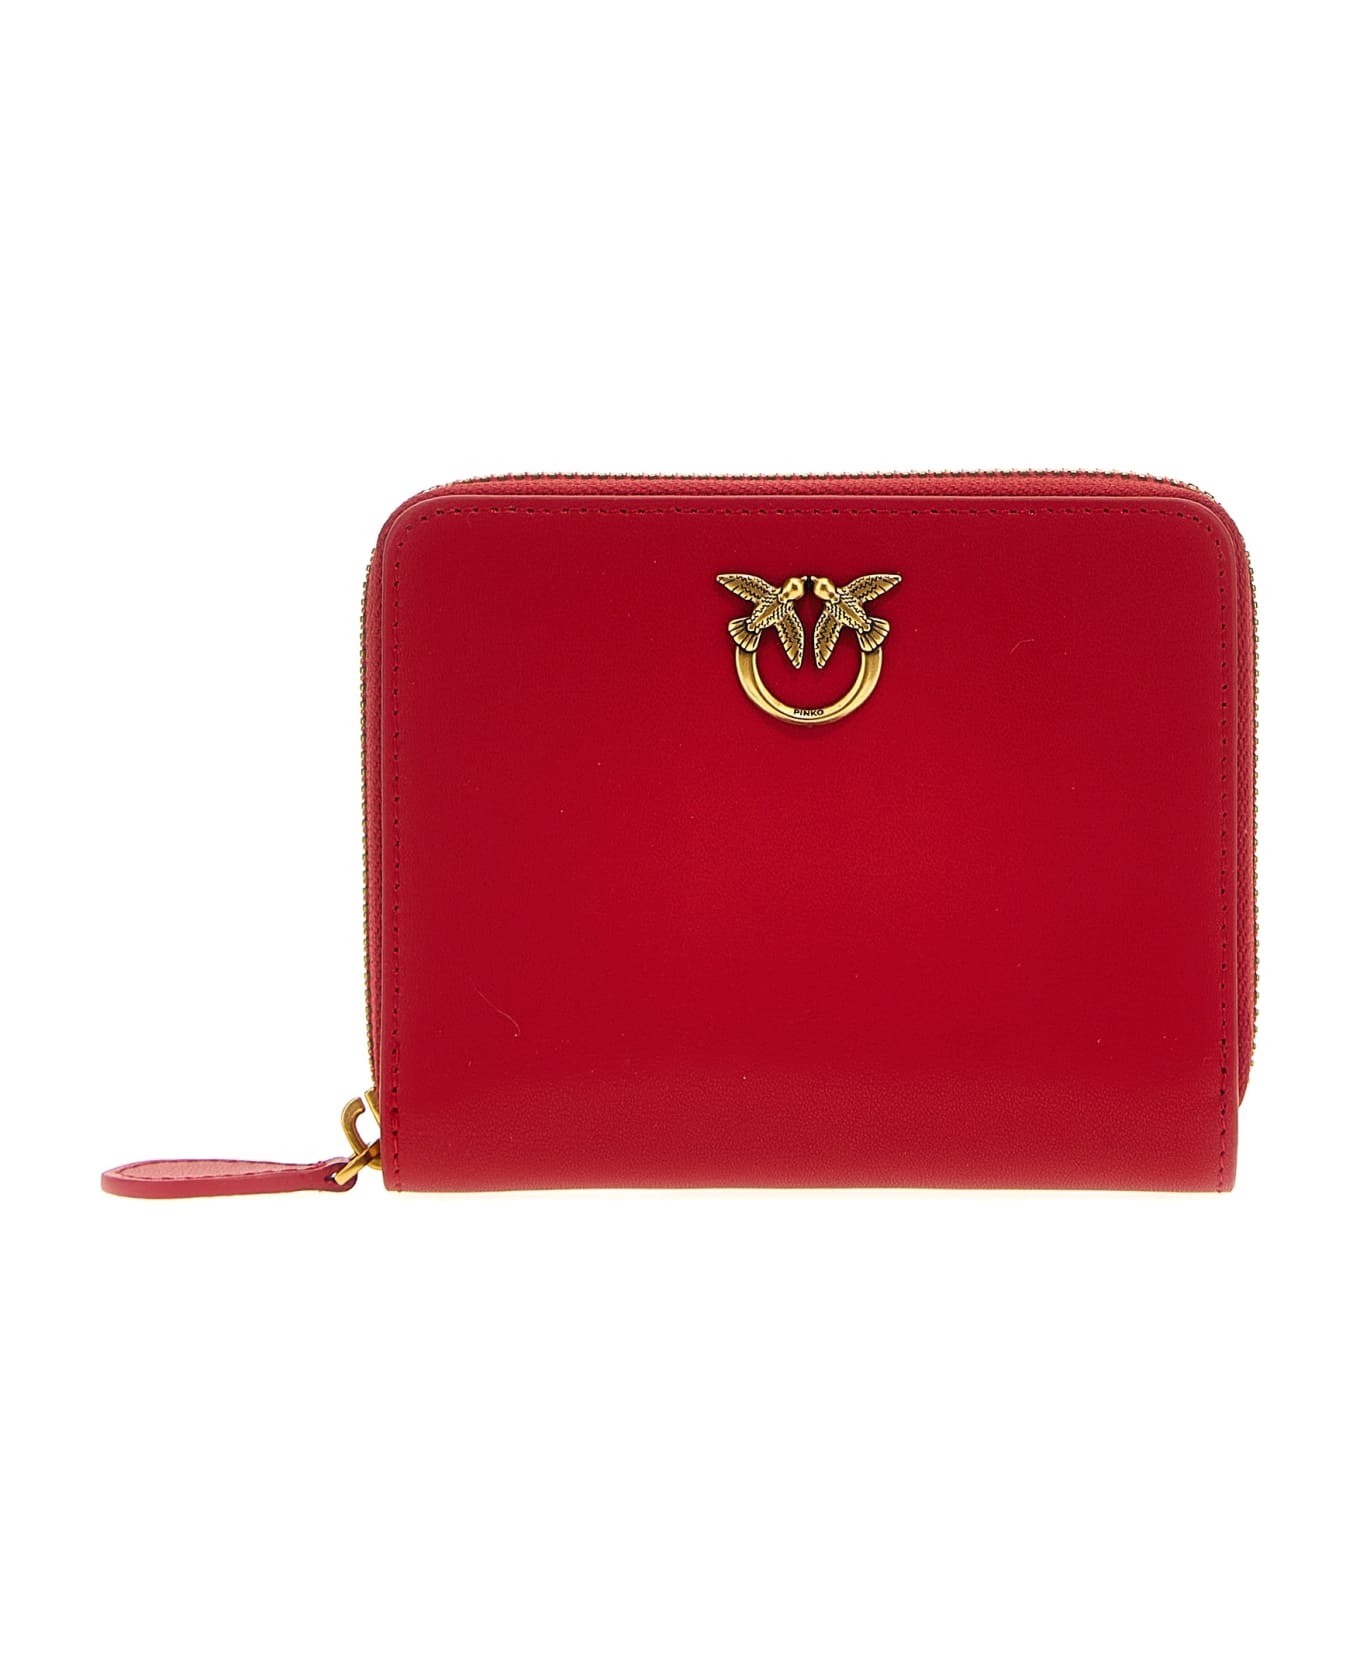 Pinko Taylor Leather Wallet - Red 財布